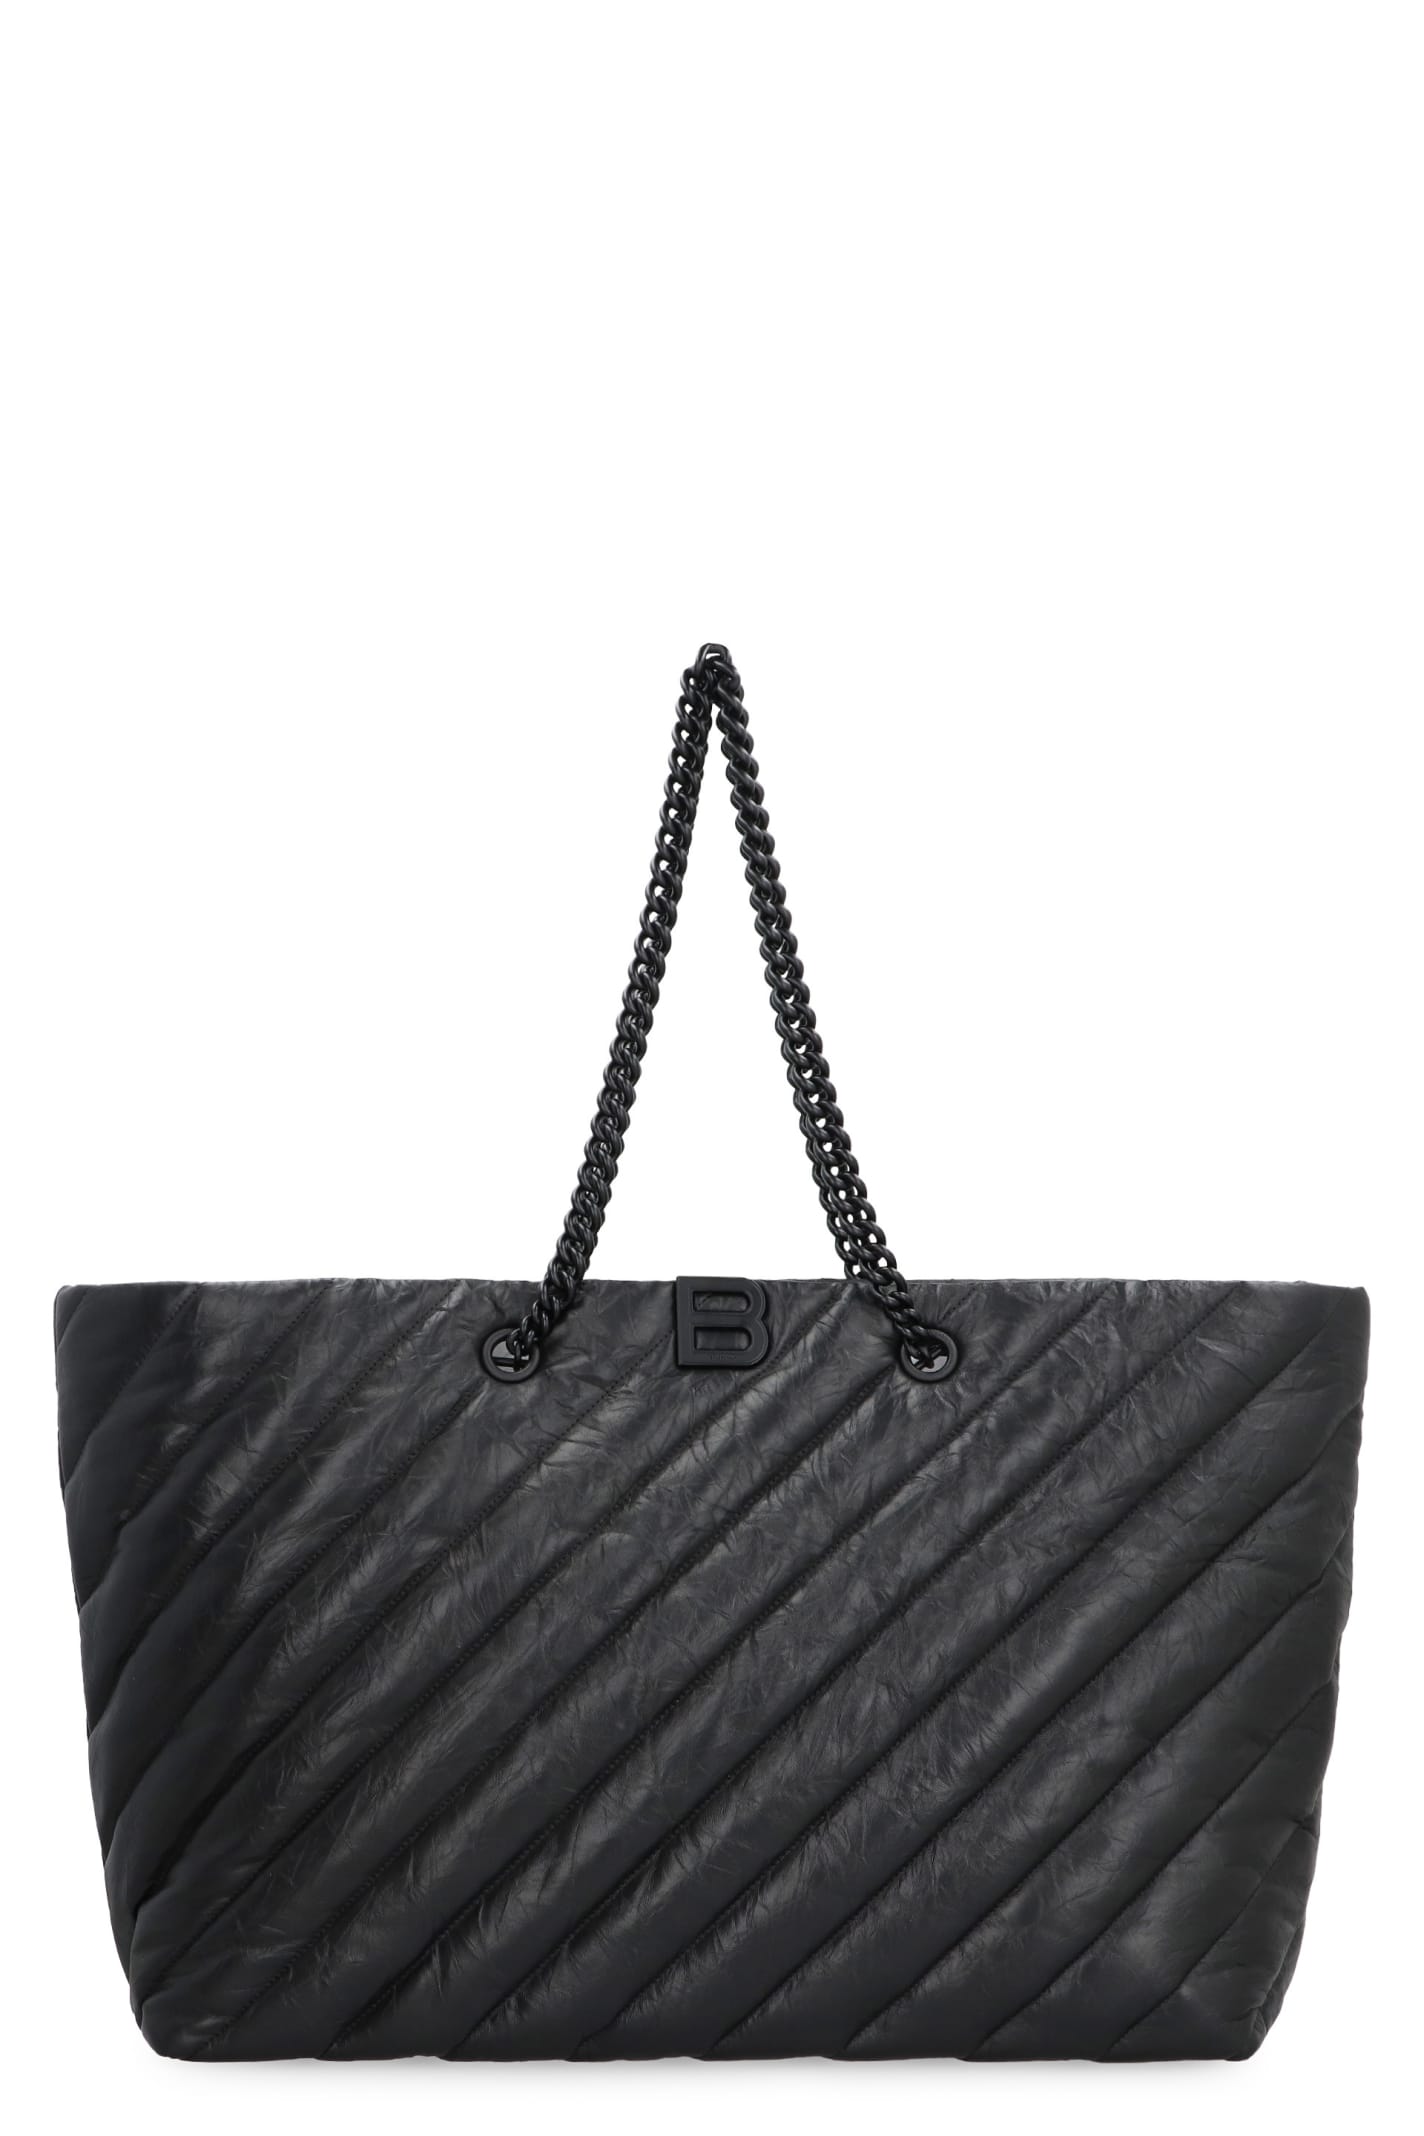 Shop Balenciaga Carry All Crush Leather Tote In Black